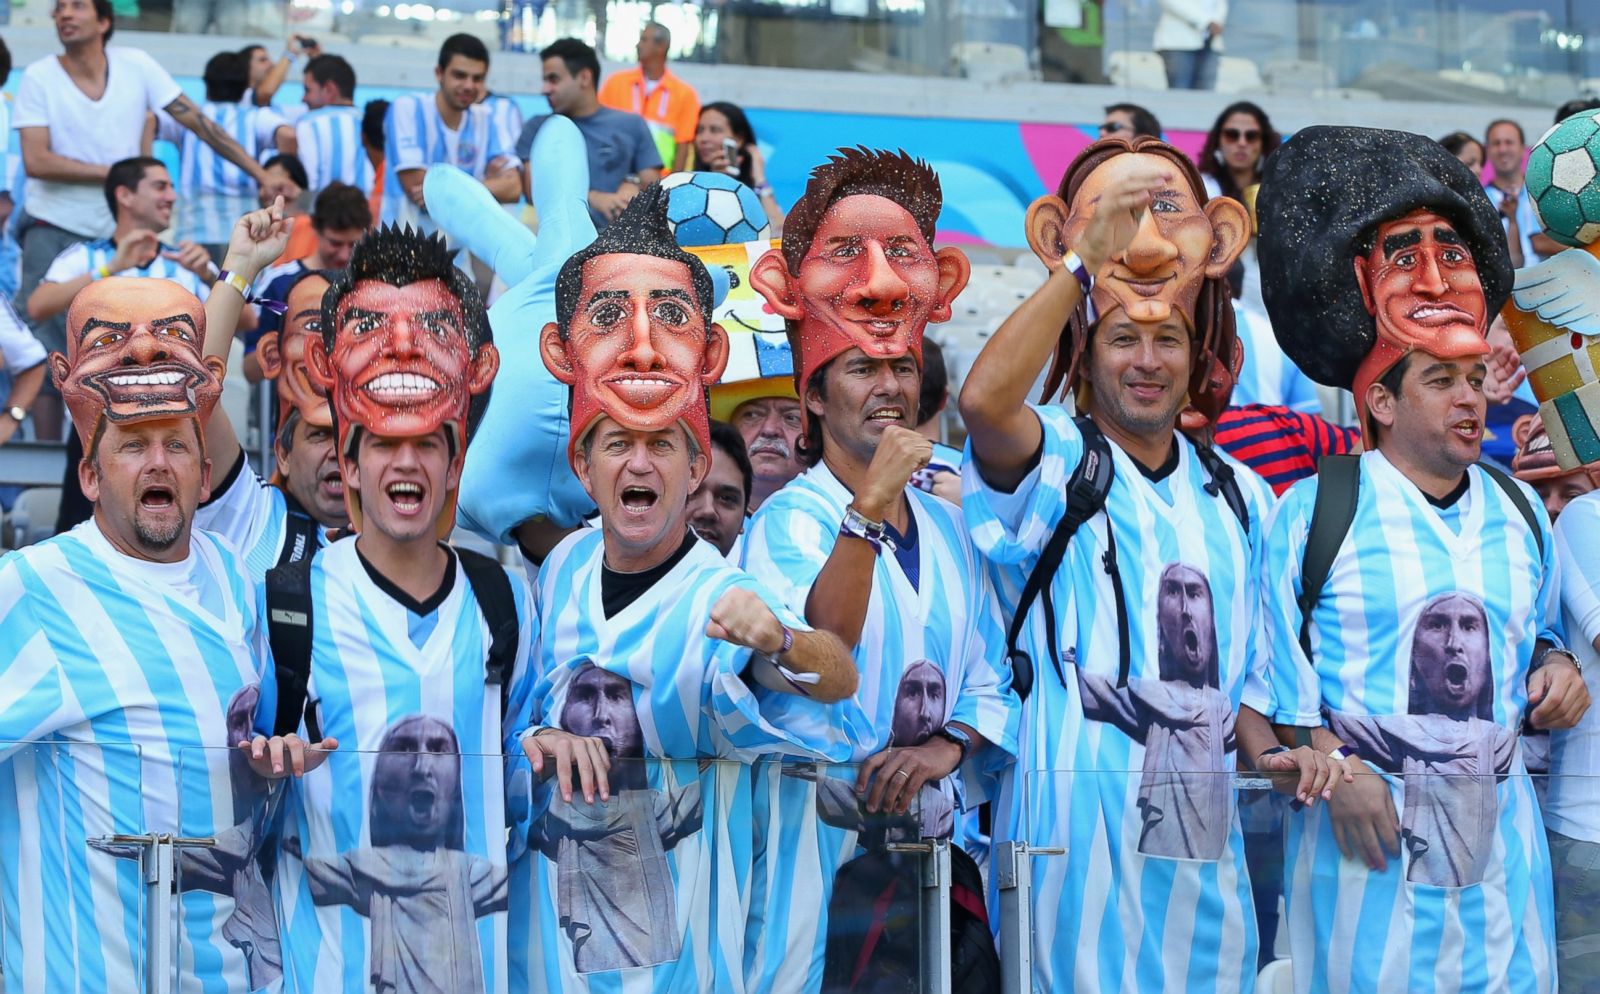 est100 一些攝影(some photos): Argentine soccer fans, 2014 FIFA World Cup